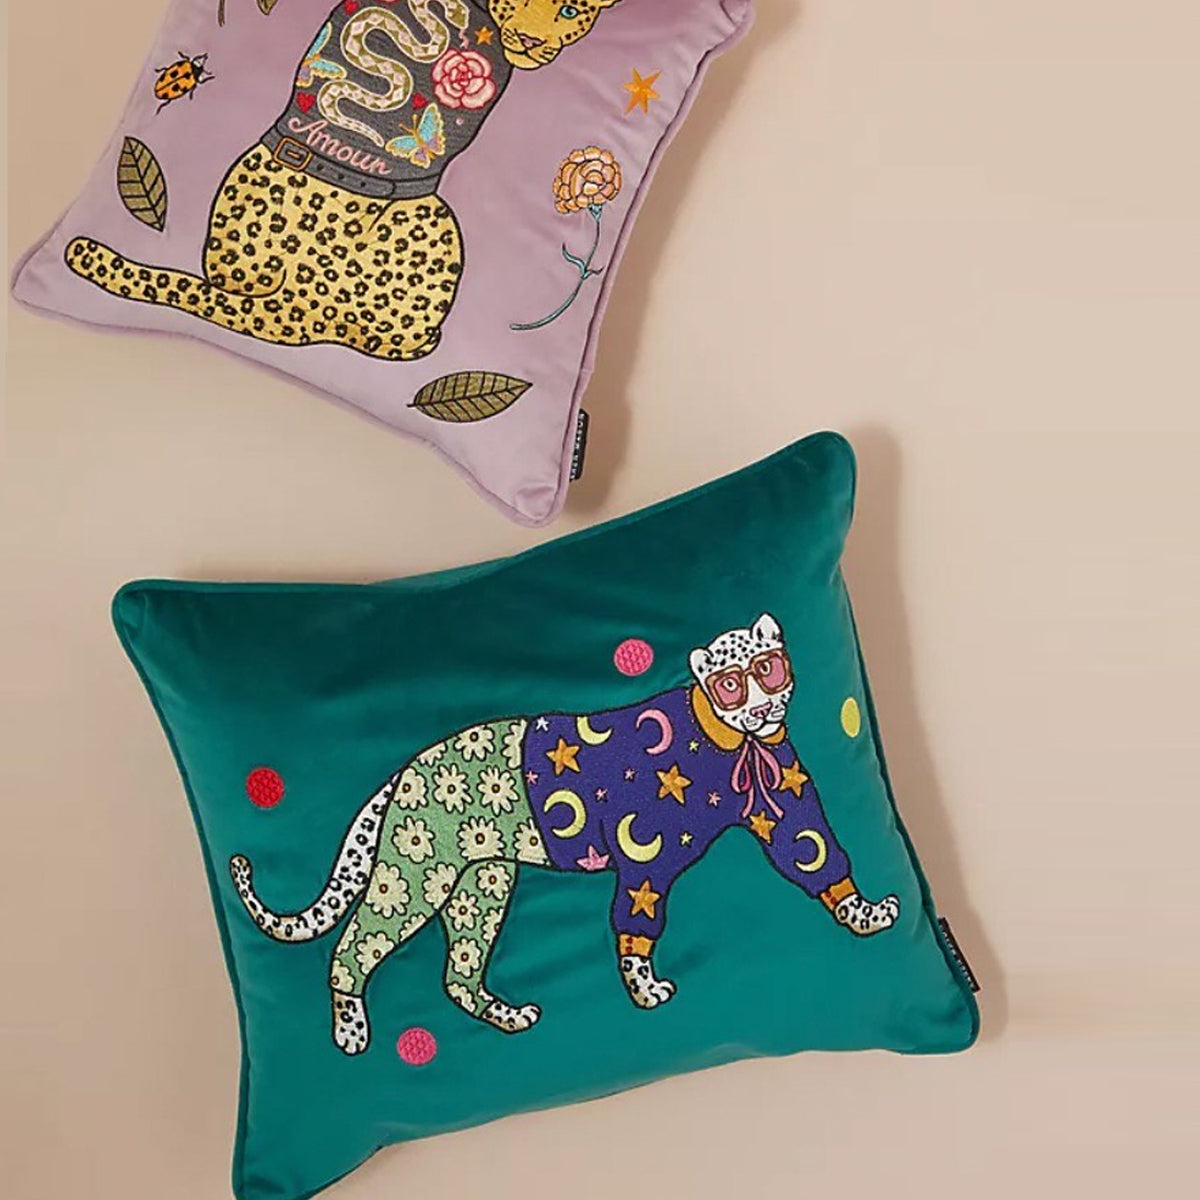 Leopards Embroidered Velvet Cushion Cover - Courthouse Exclusive by Karen Mabon